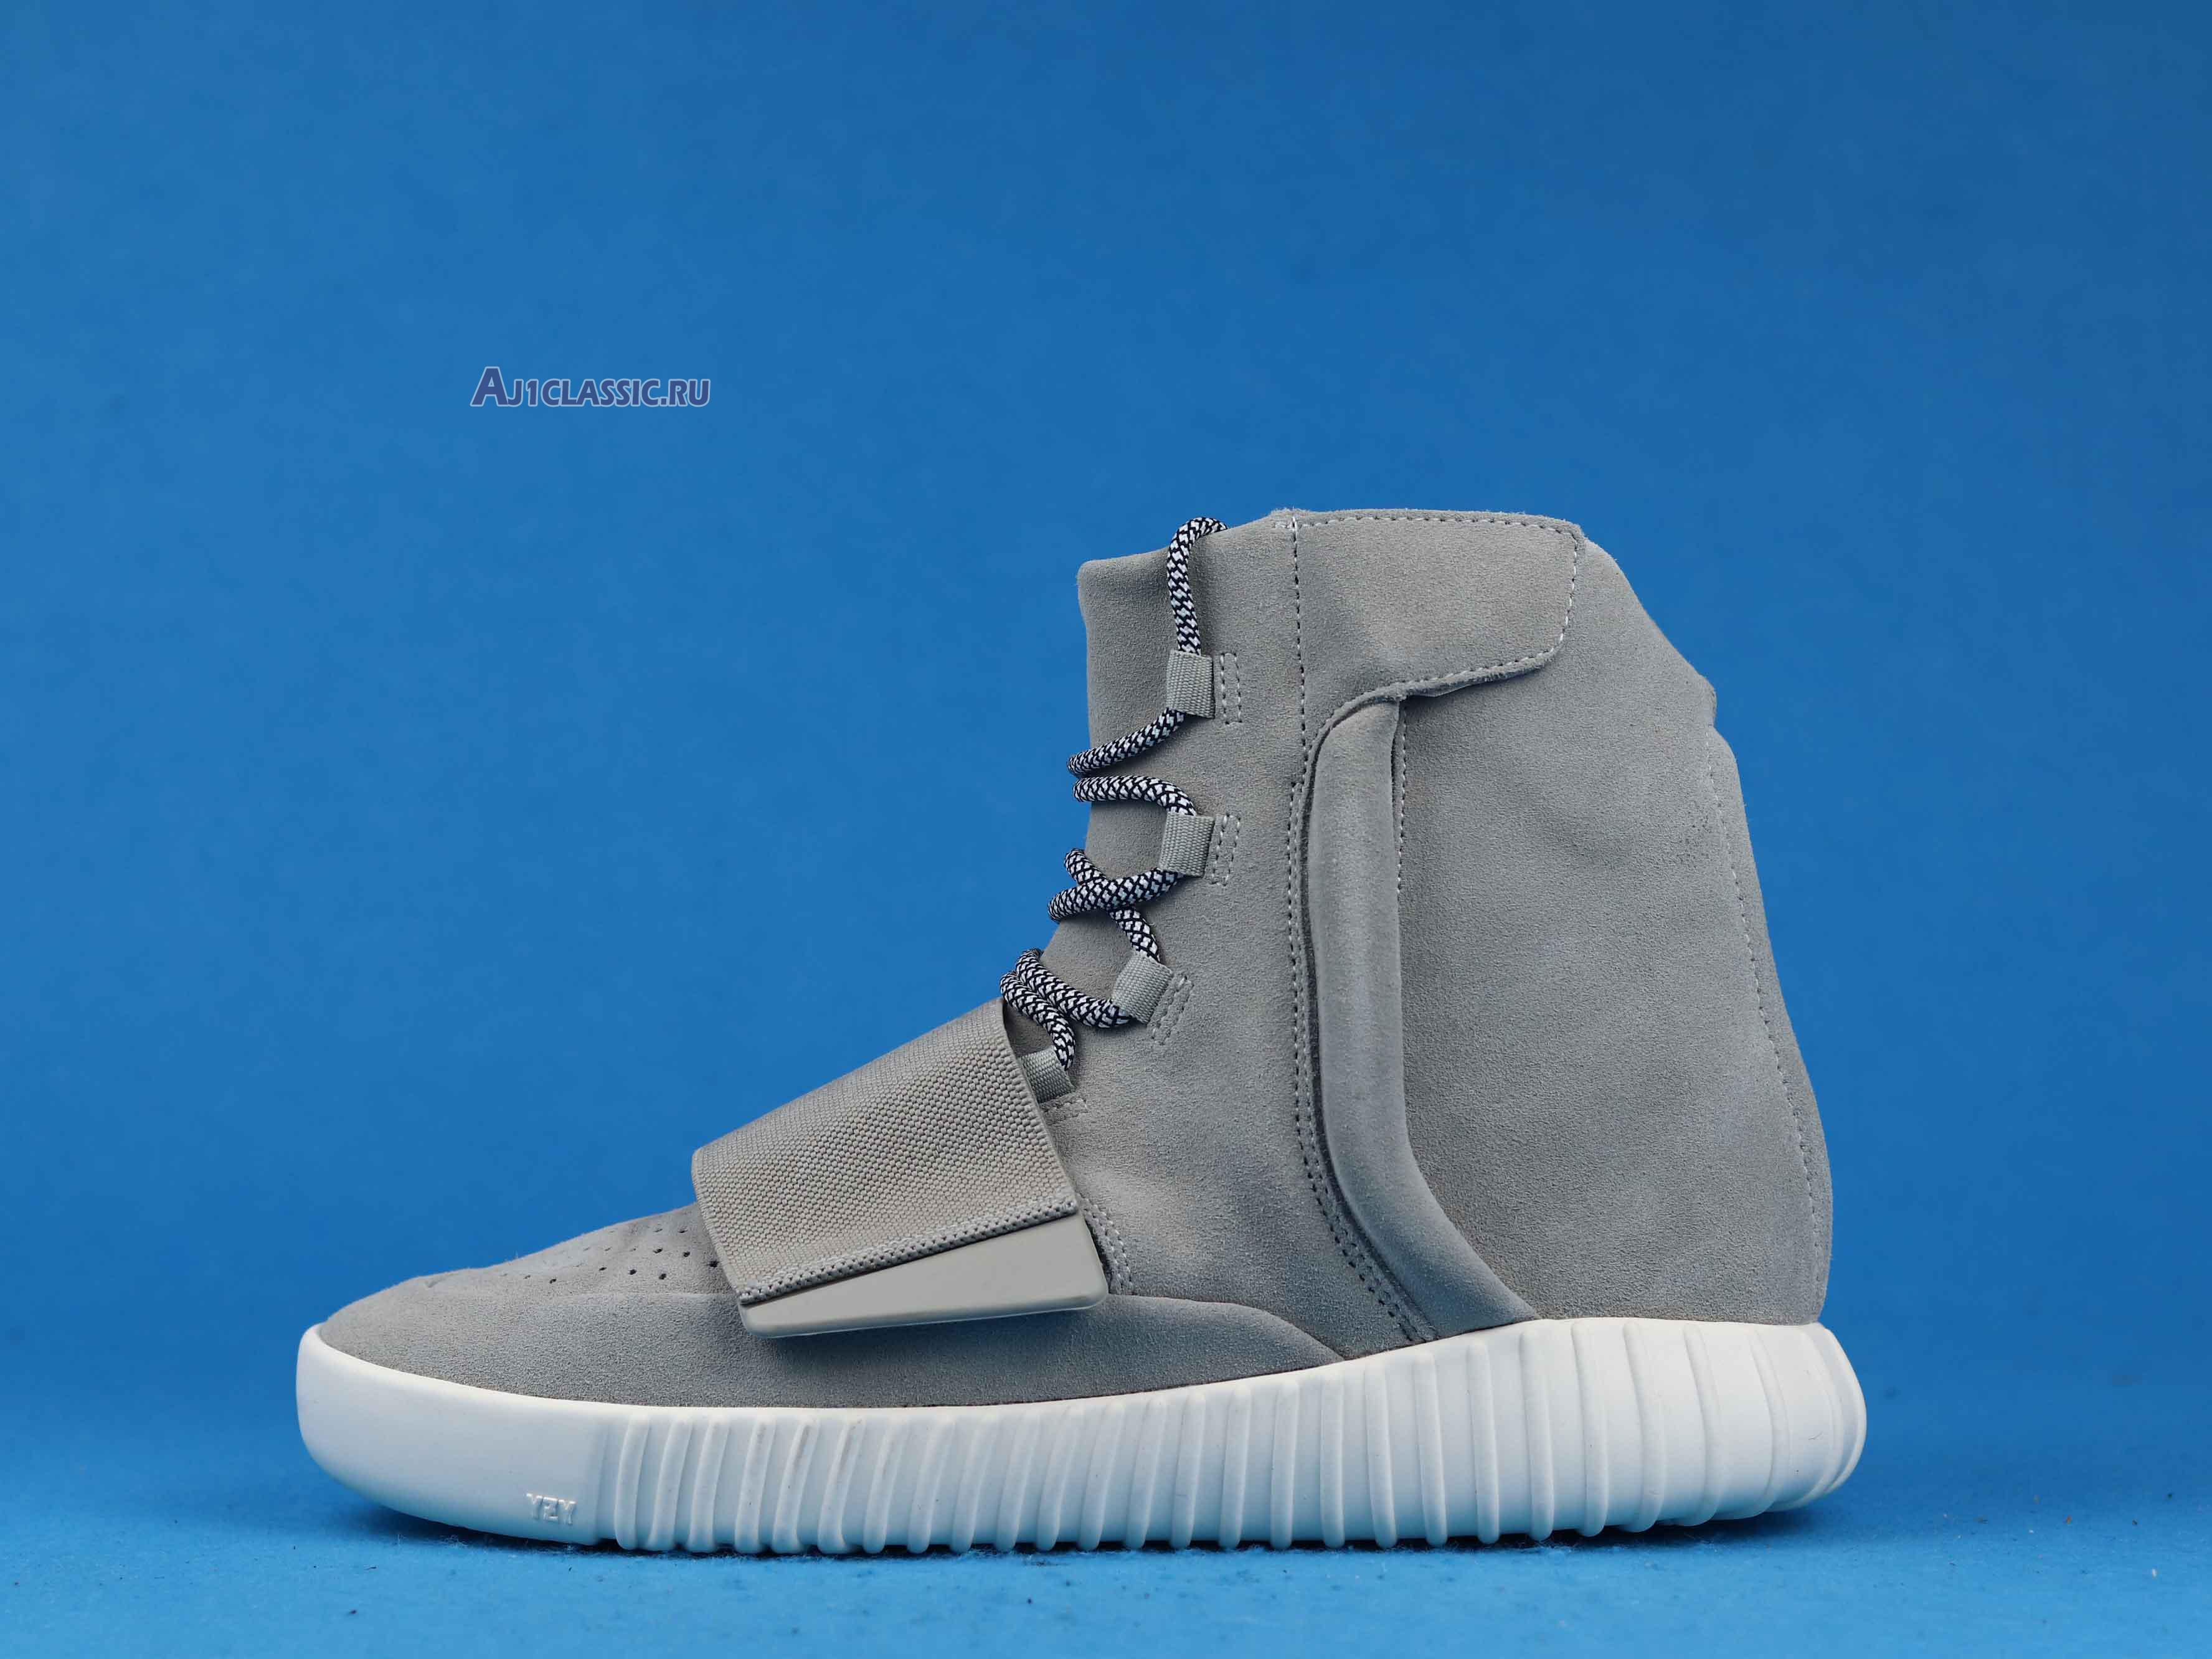 Adidas Yeezy Boost 750 OG B35309 Light Brown/Carbon White/Light Brown Sneakers